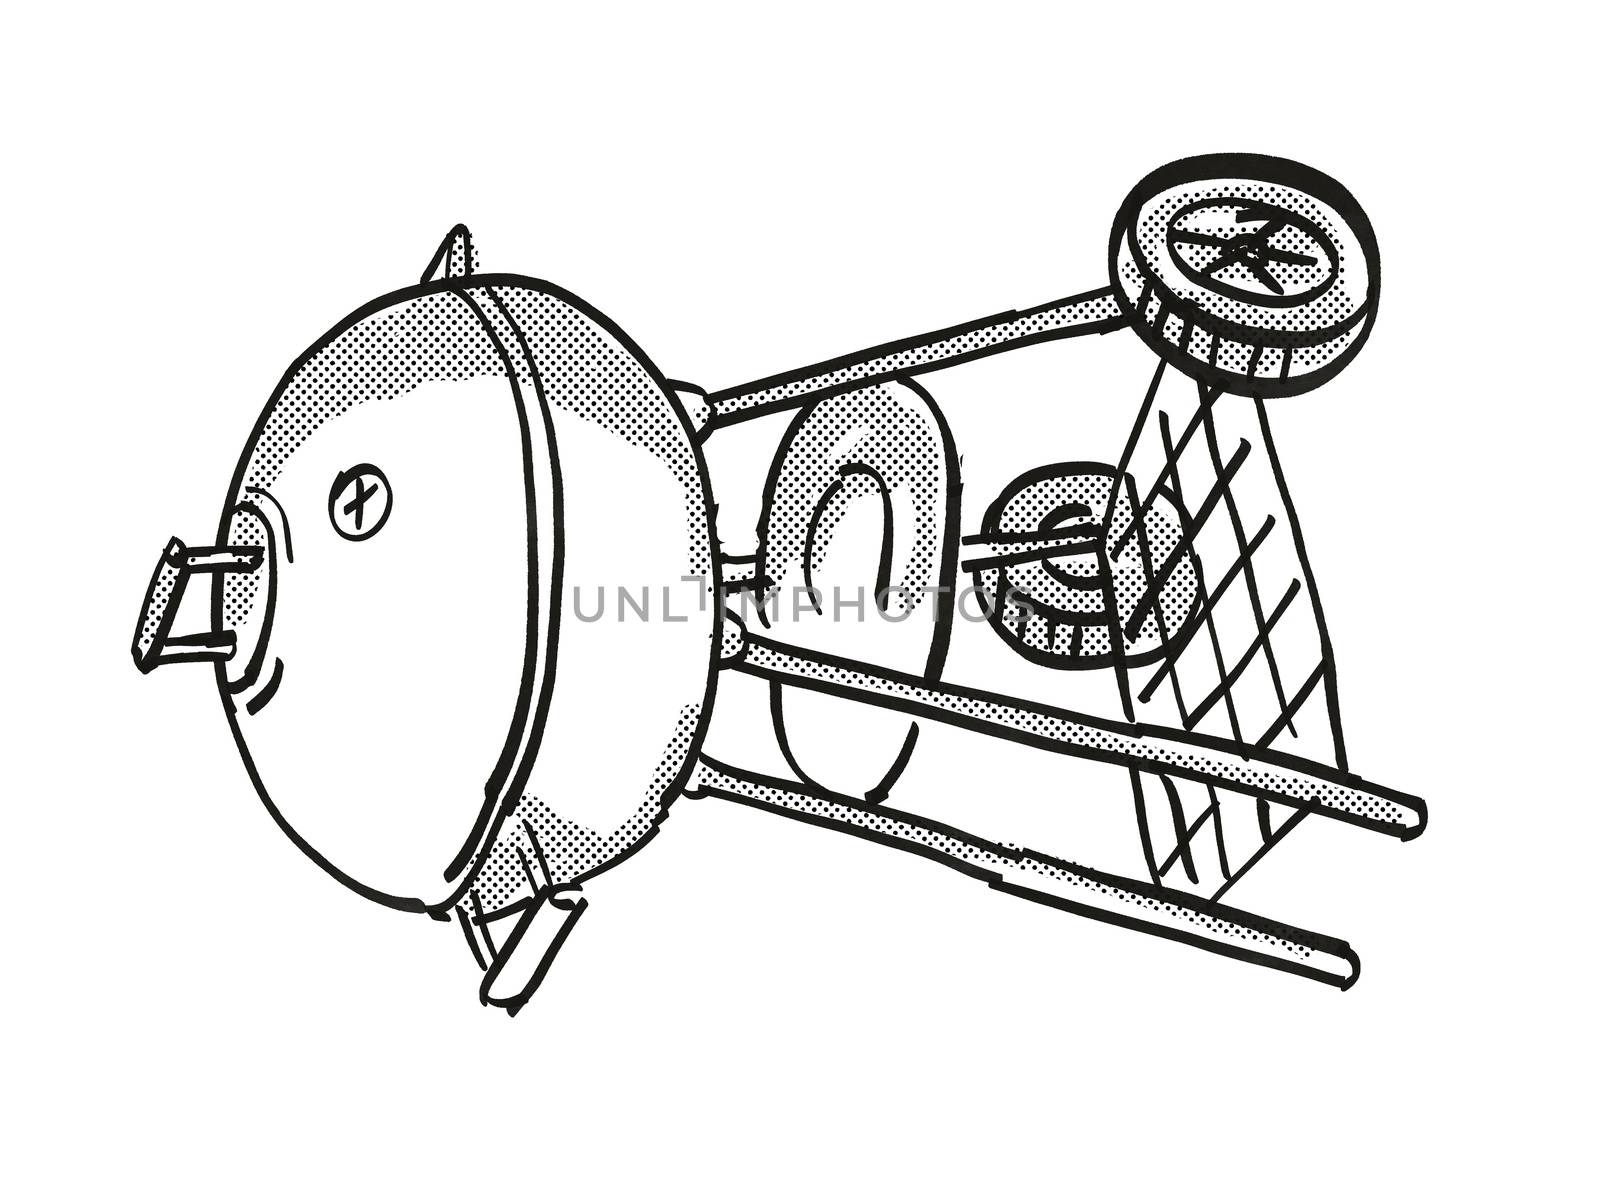 Retro cartoon style drawing of a Portable Barbecue Charcoal Grill on isolated white background done in black and white.